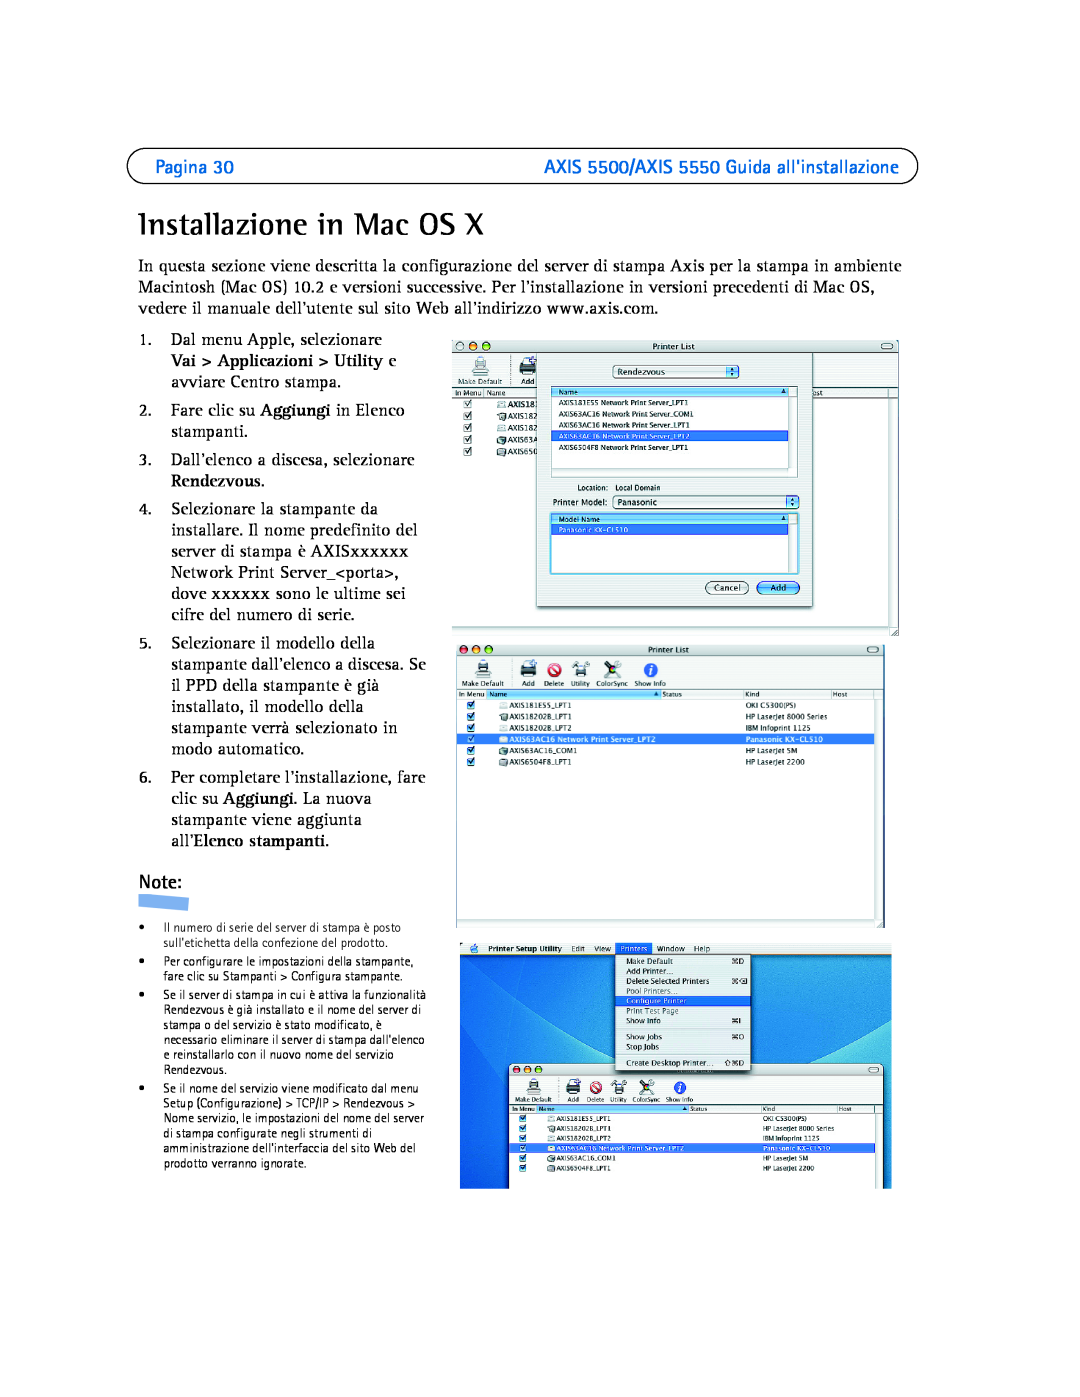 Axis Communications AXIS 5500, AXIS 5550 manual Installazione in Mac OS, Pagina 